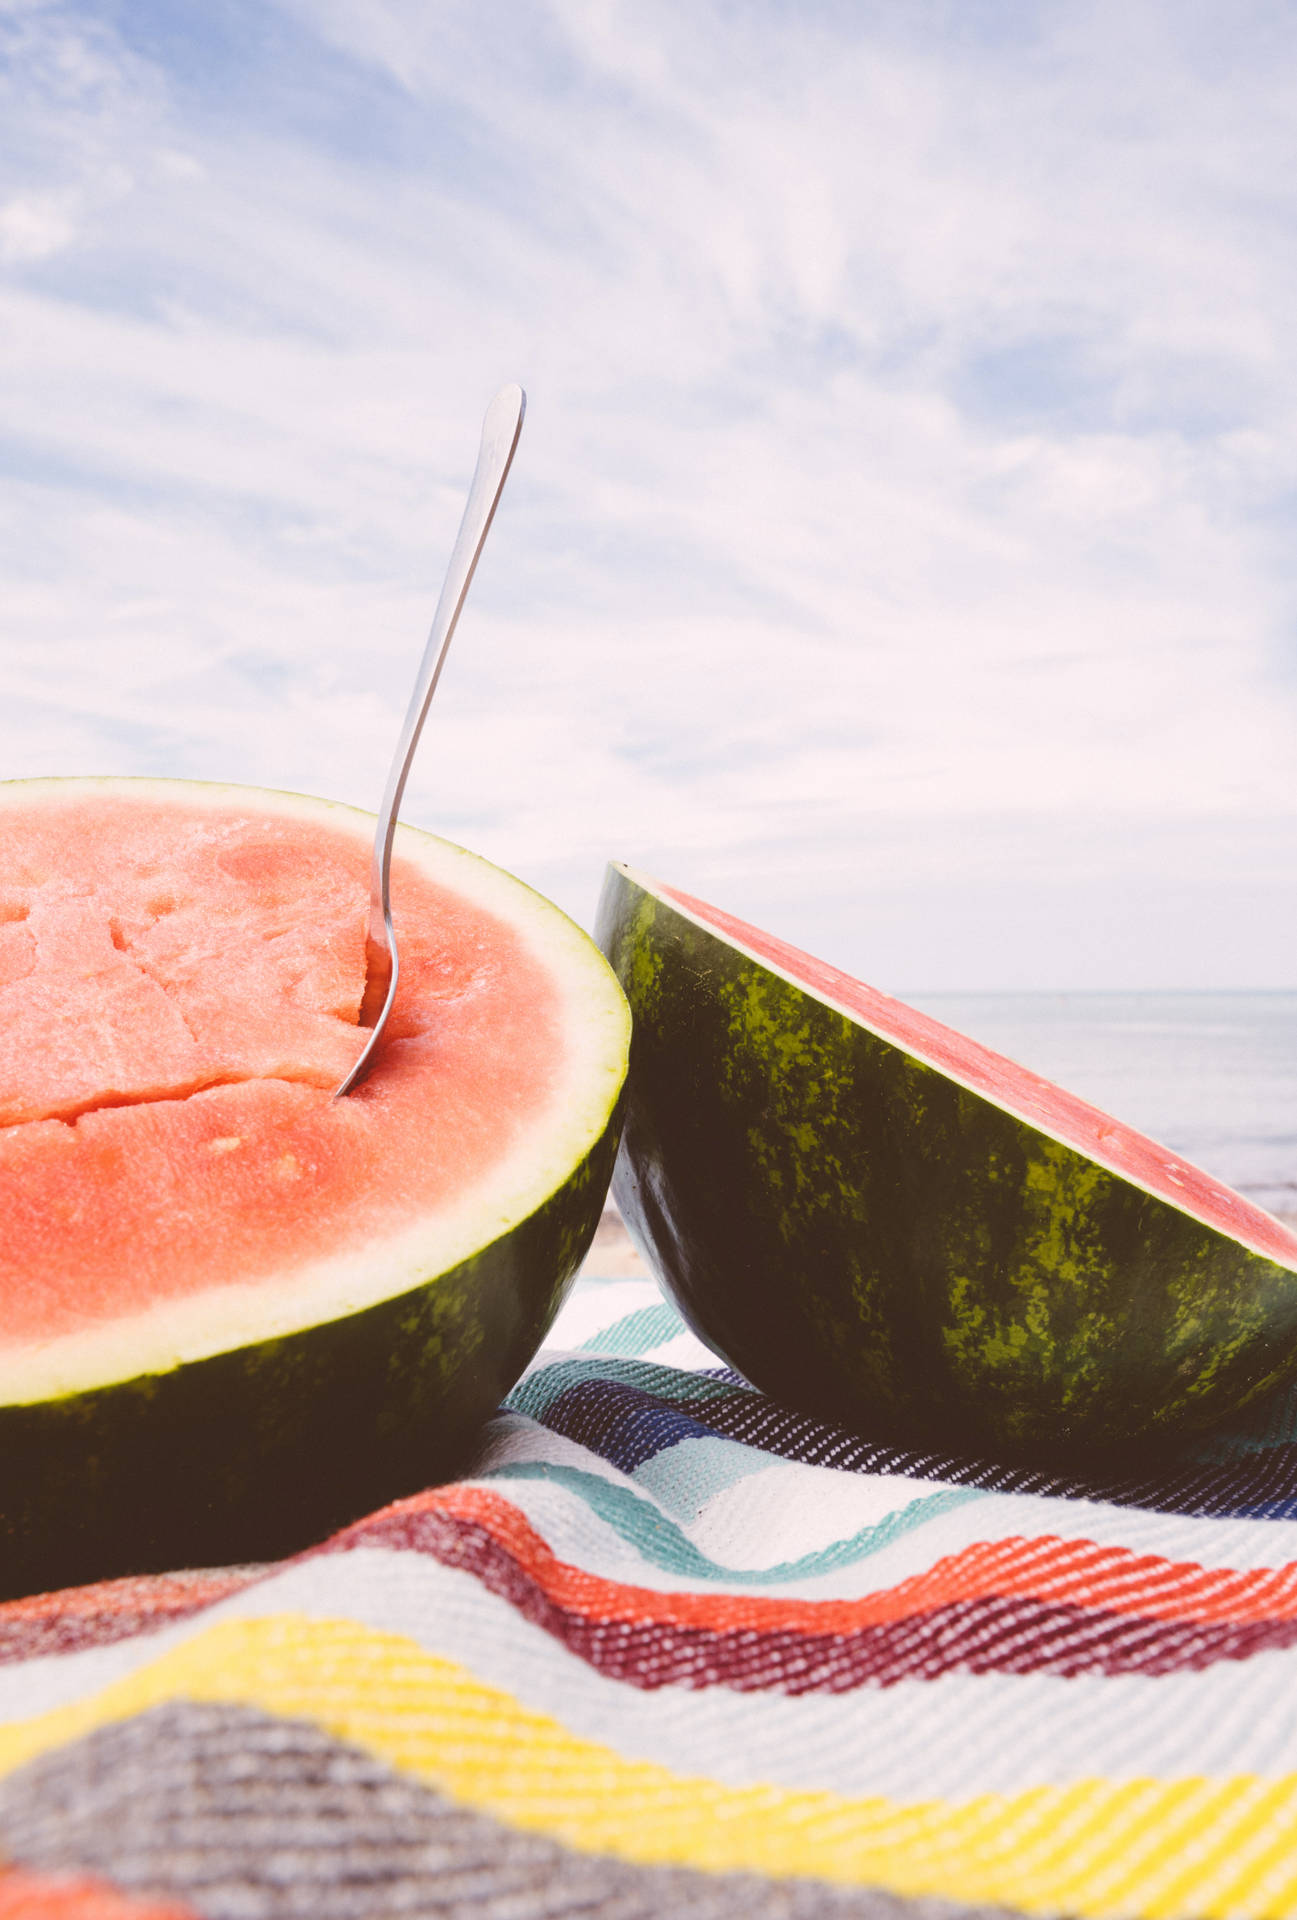 Watermelons In Summer Background